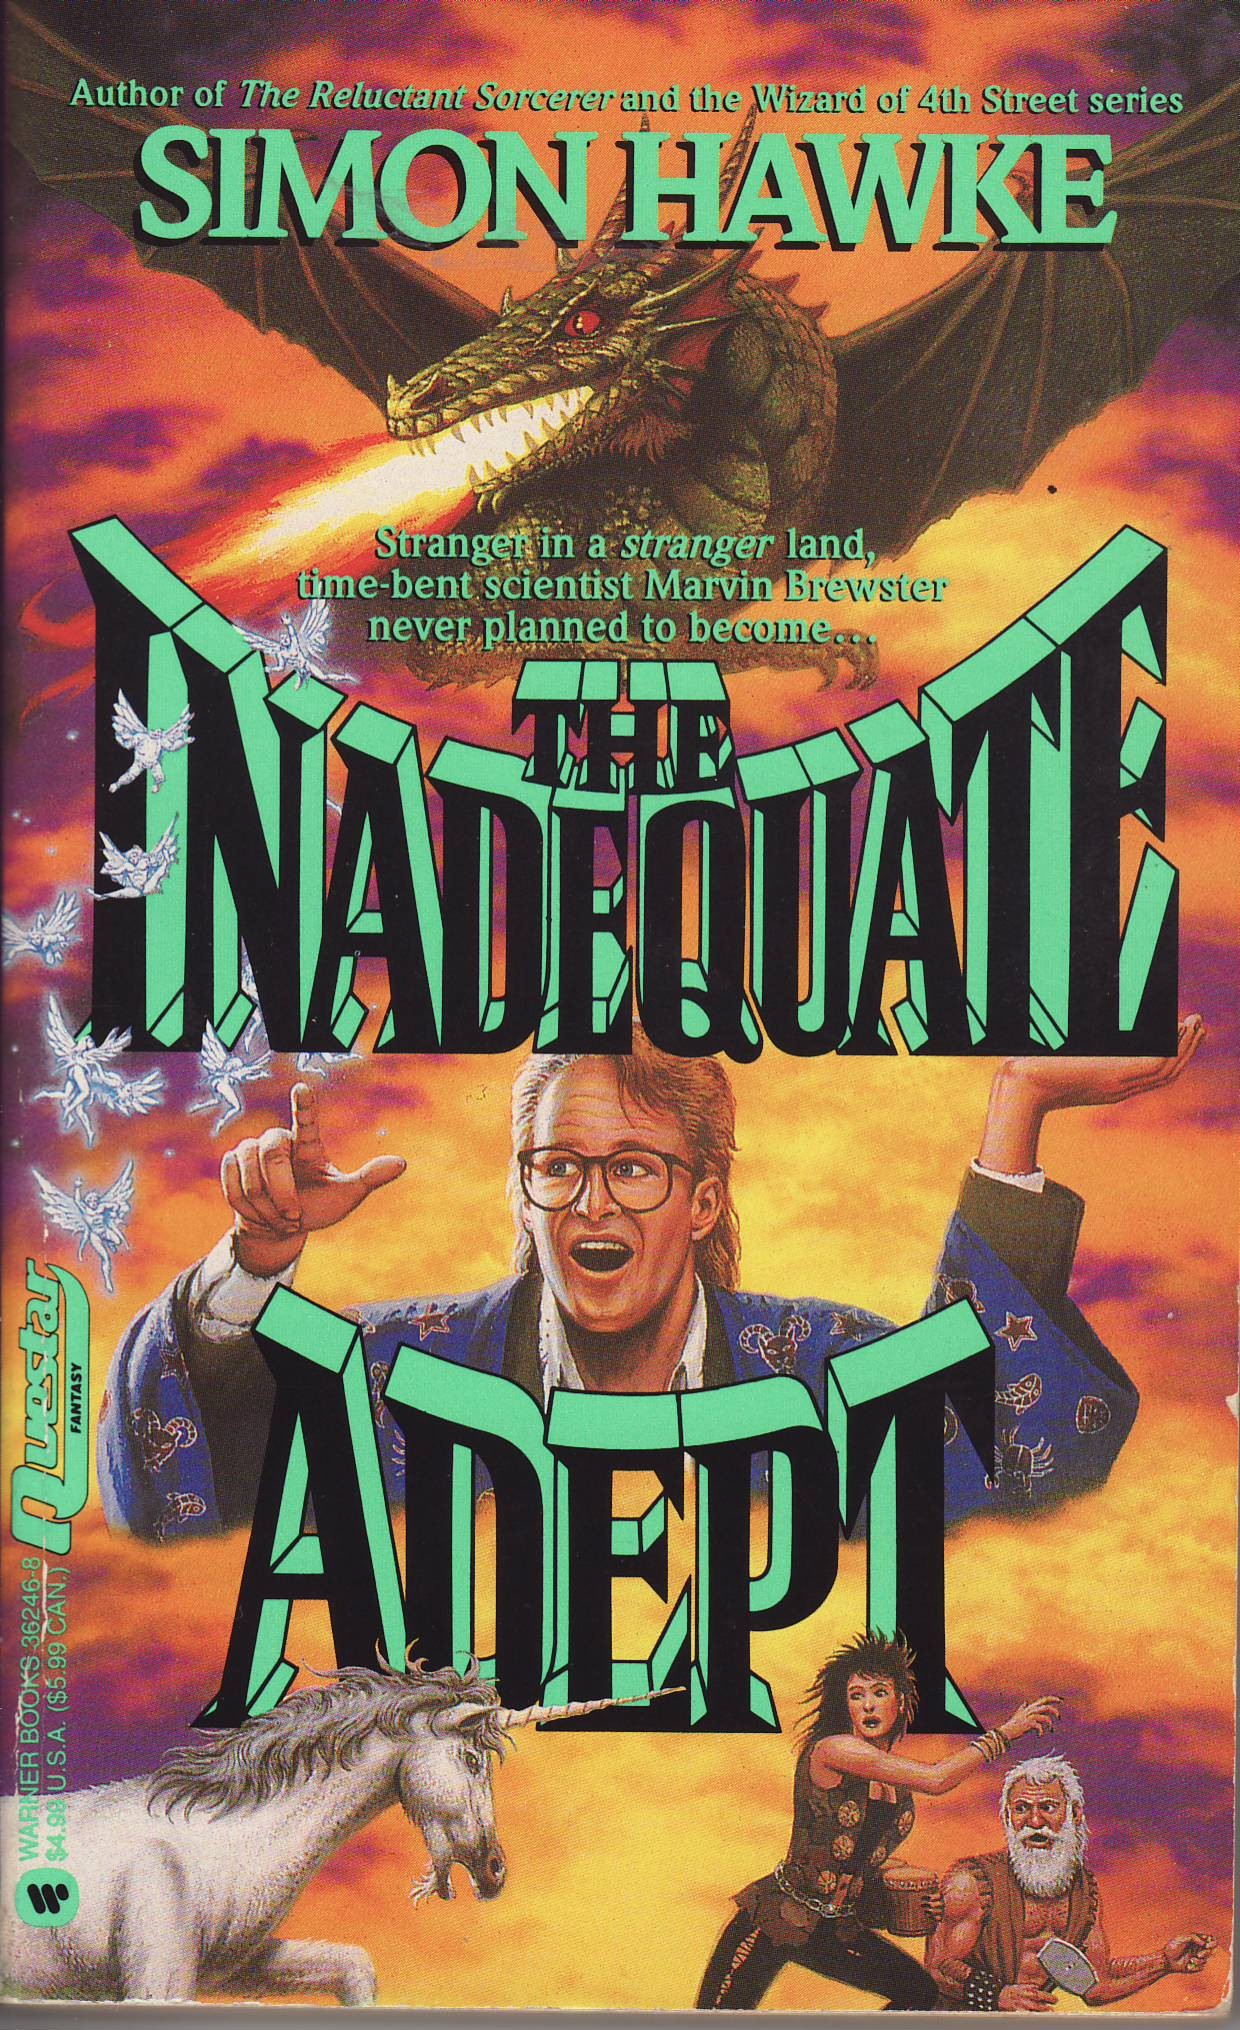 The Inadequate Adept